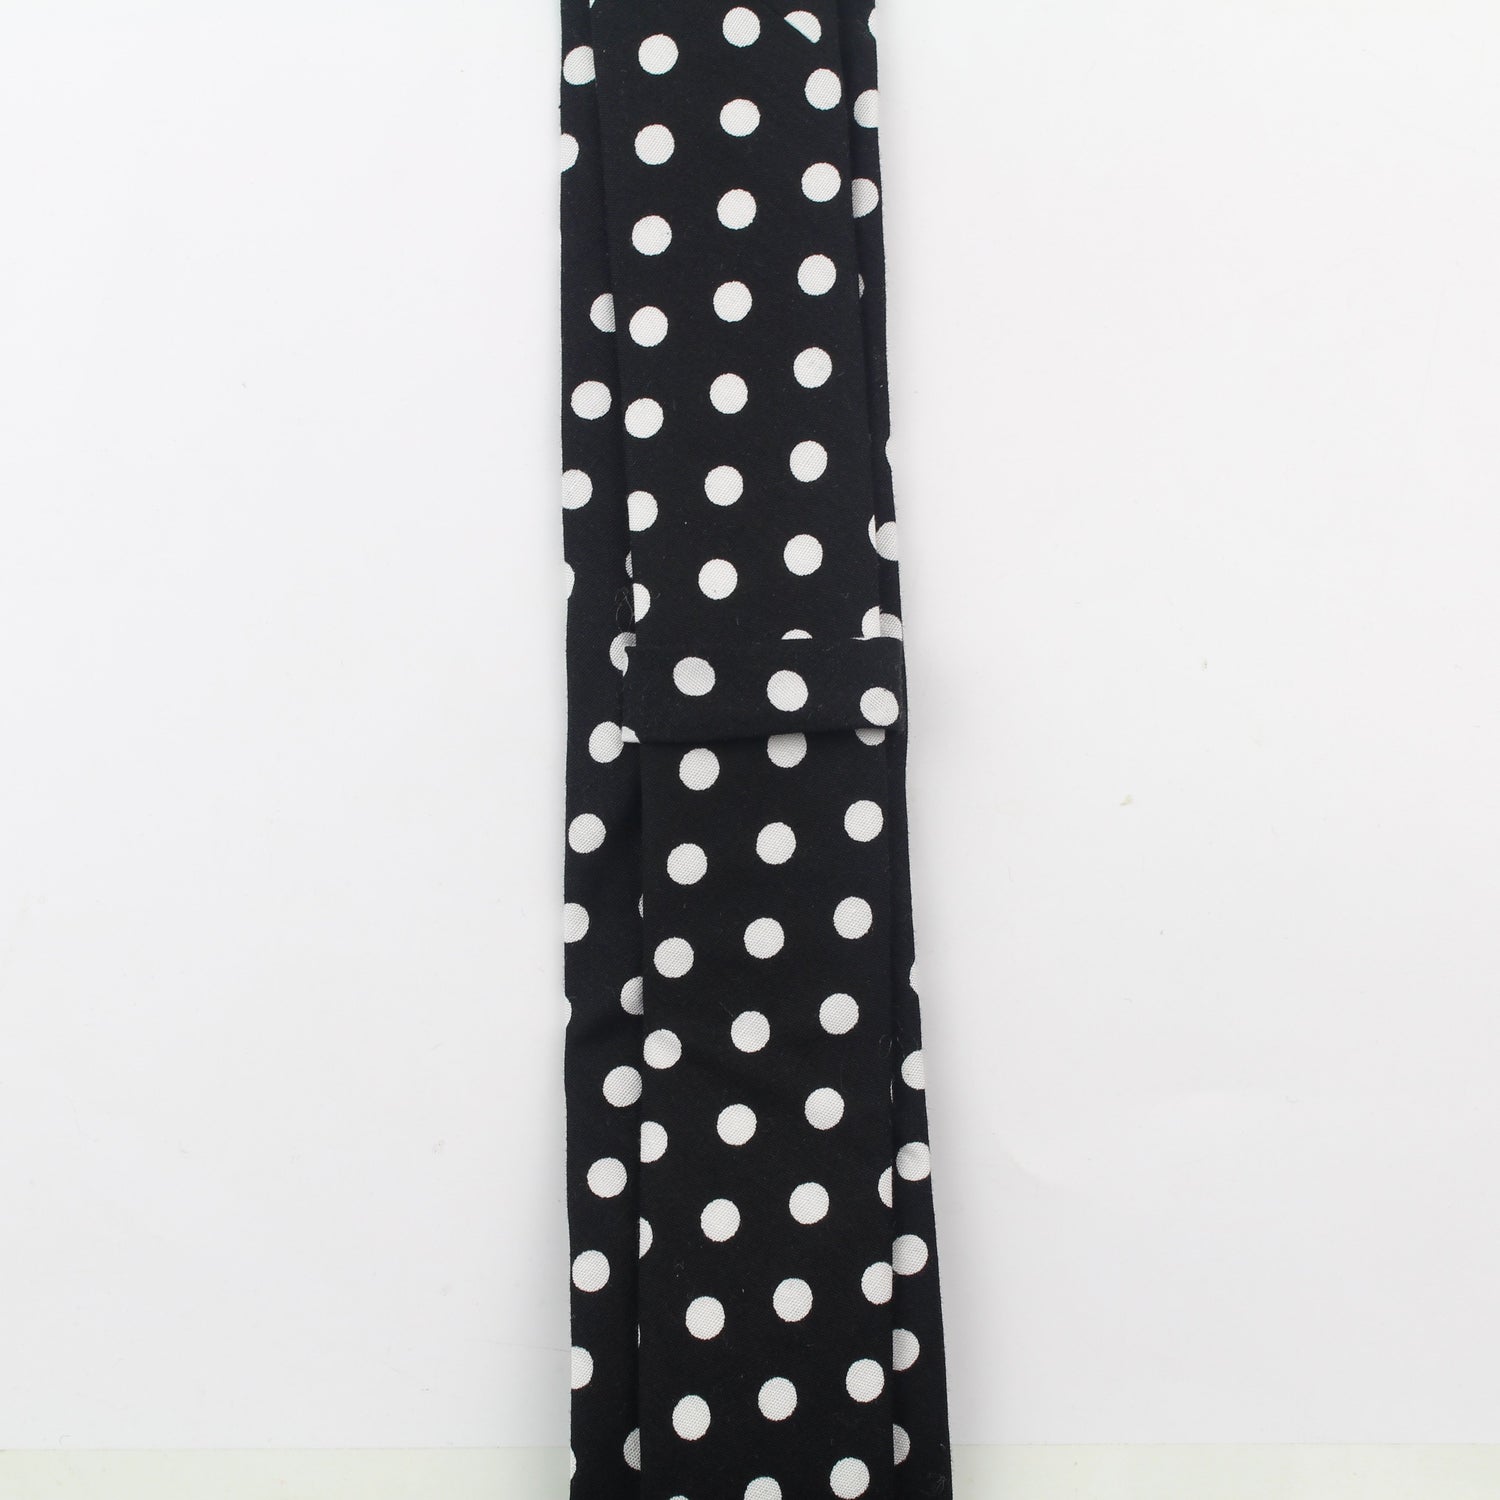 Jet Black Tie With Bright White Polka Dots-SHOPWITHSTYLE